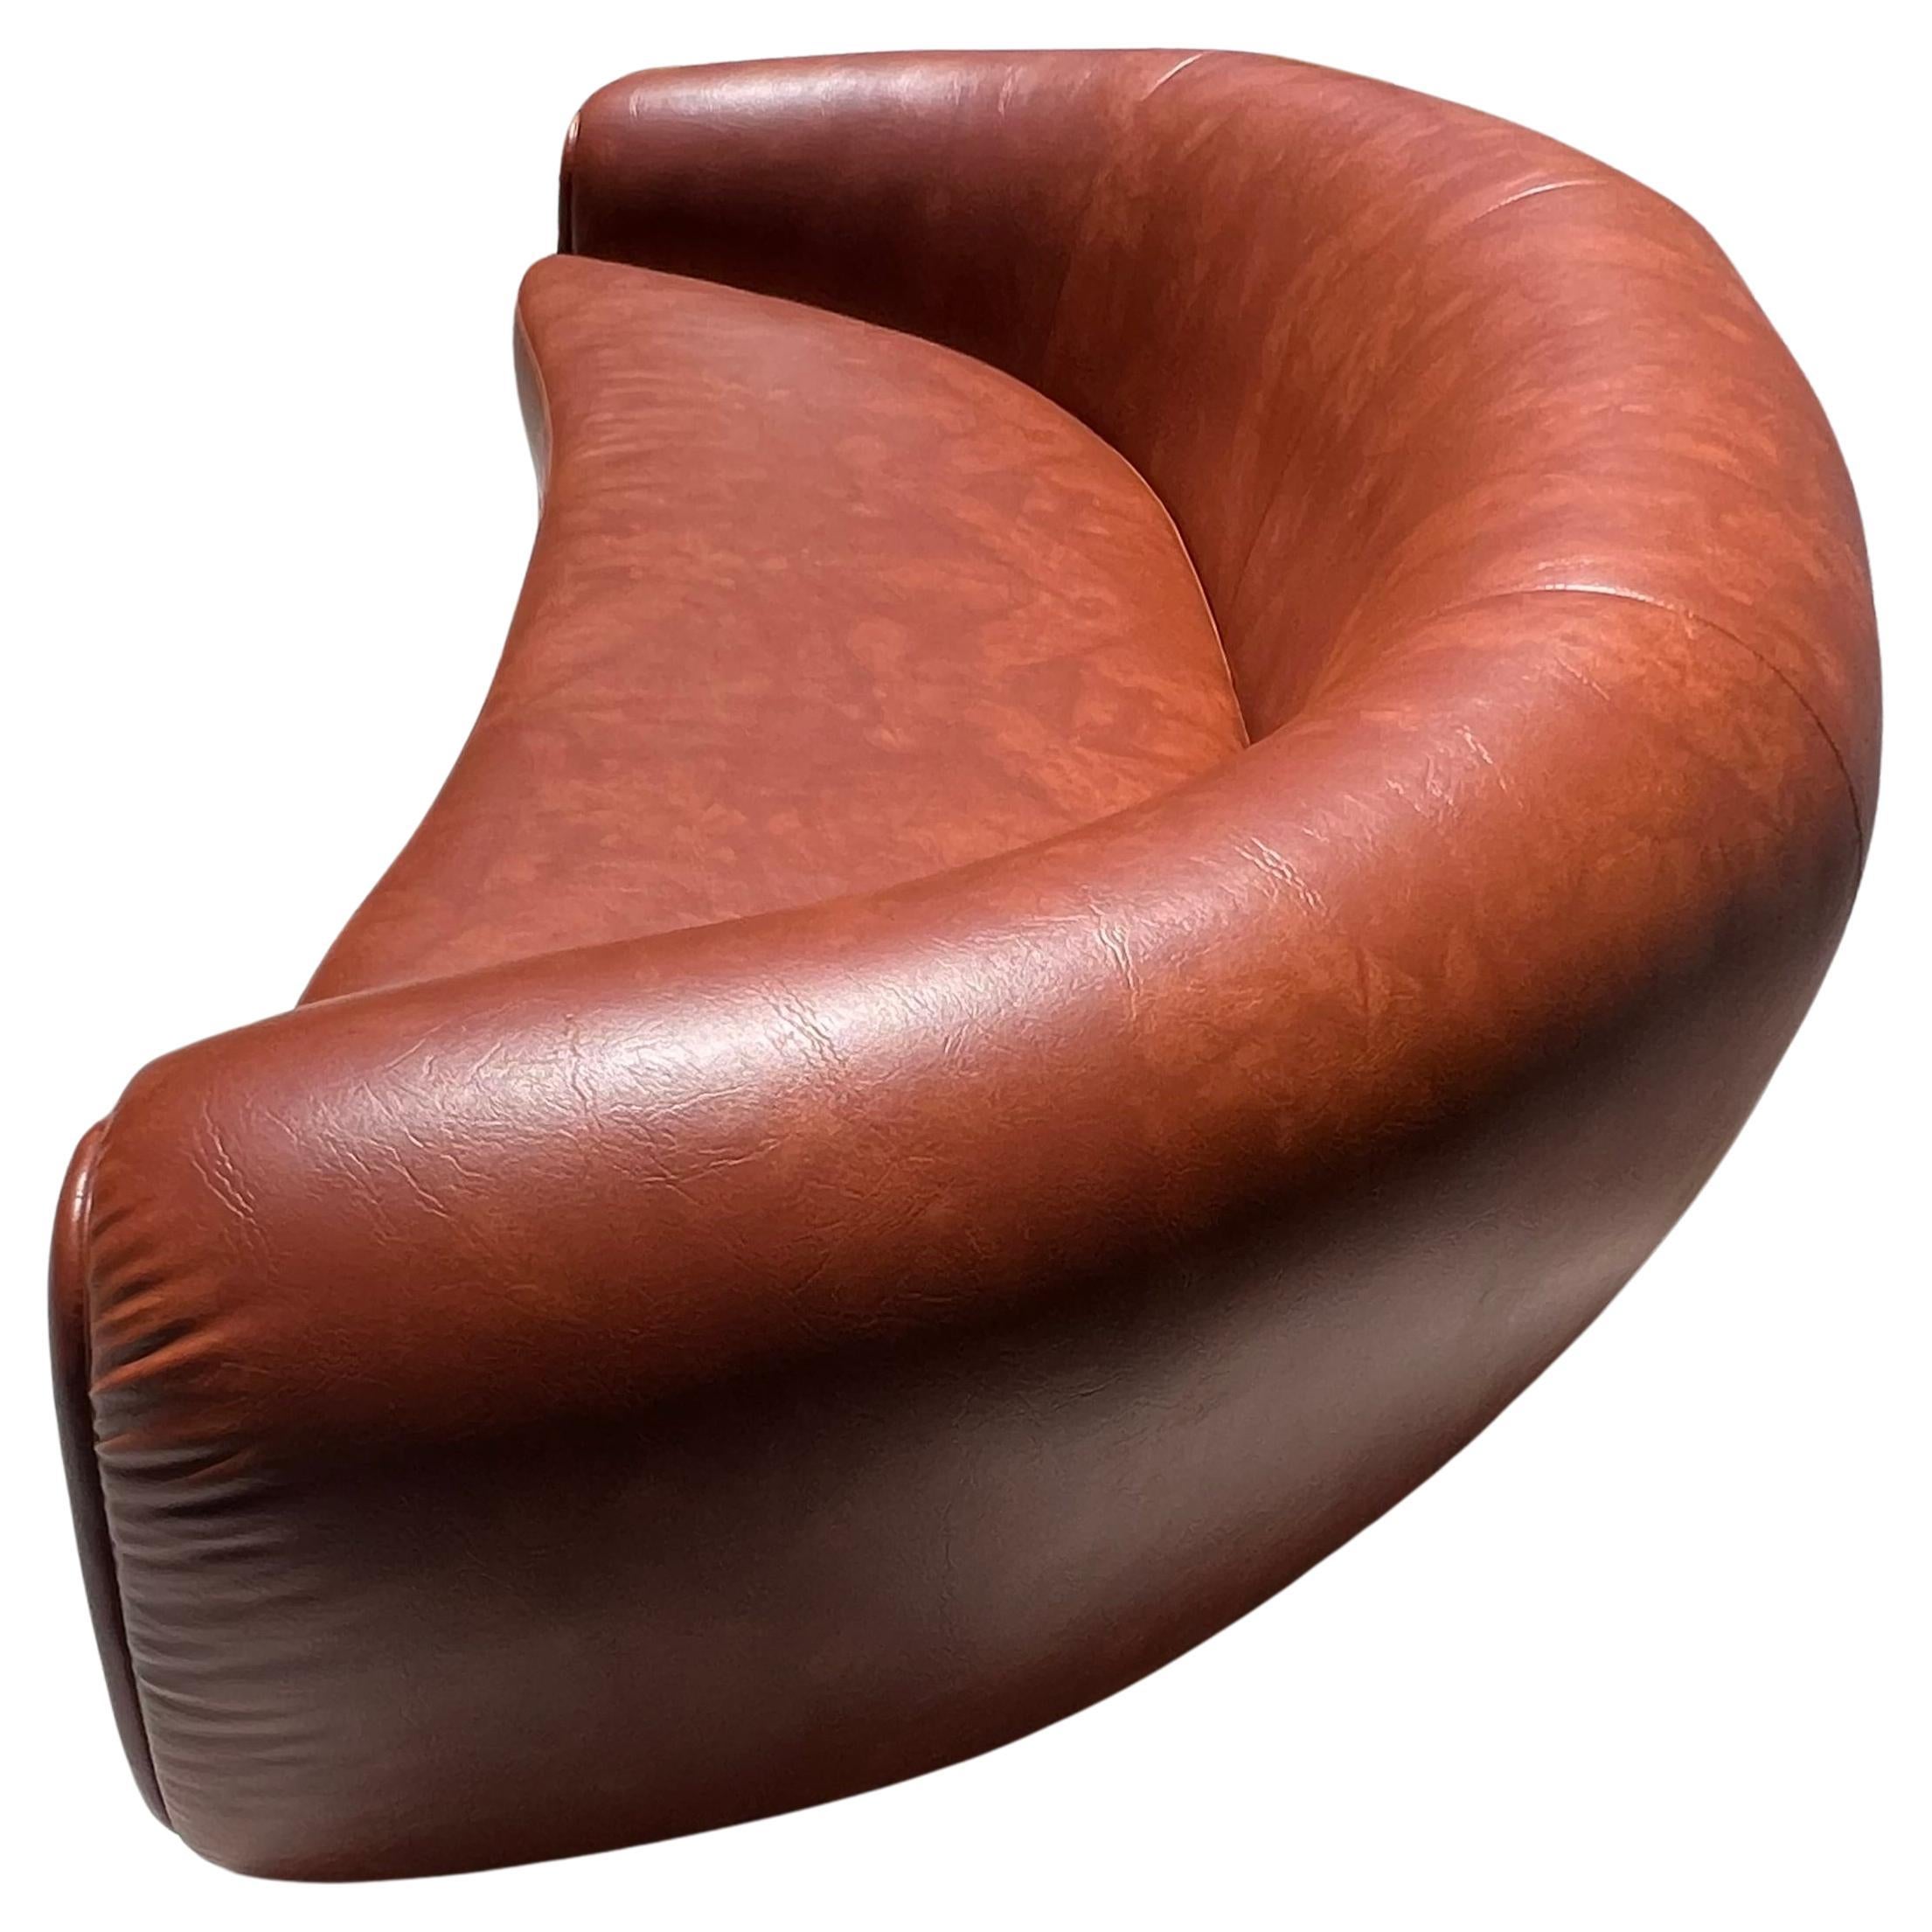 A curvy cognac pleather sofa with a bombastically bulging edge and back after Jean Royère, 21st century. Featuring girthy wooden legs and a 70s orange underlay upholstery. Immaculate condition. This was a custom made piece in the style of Jean